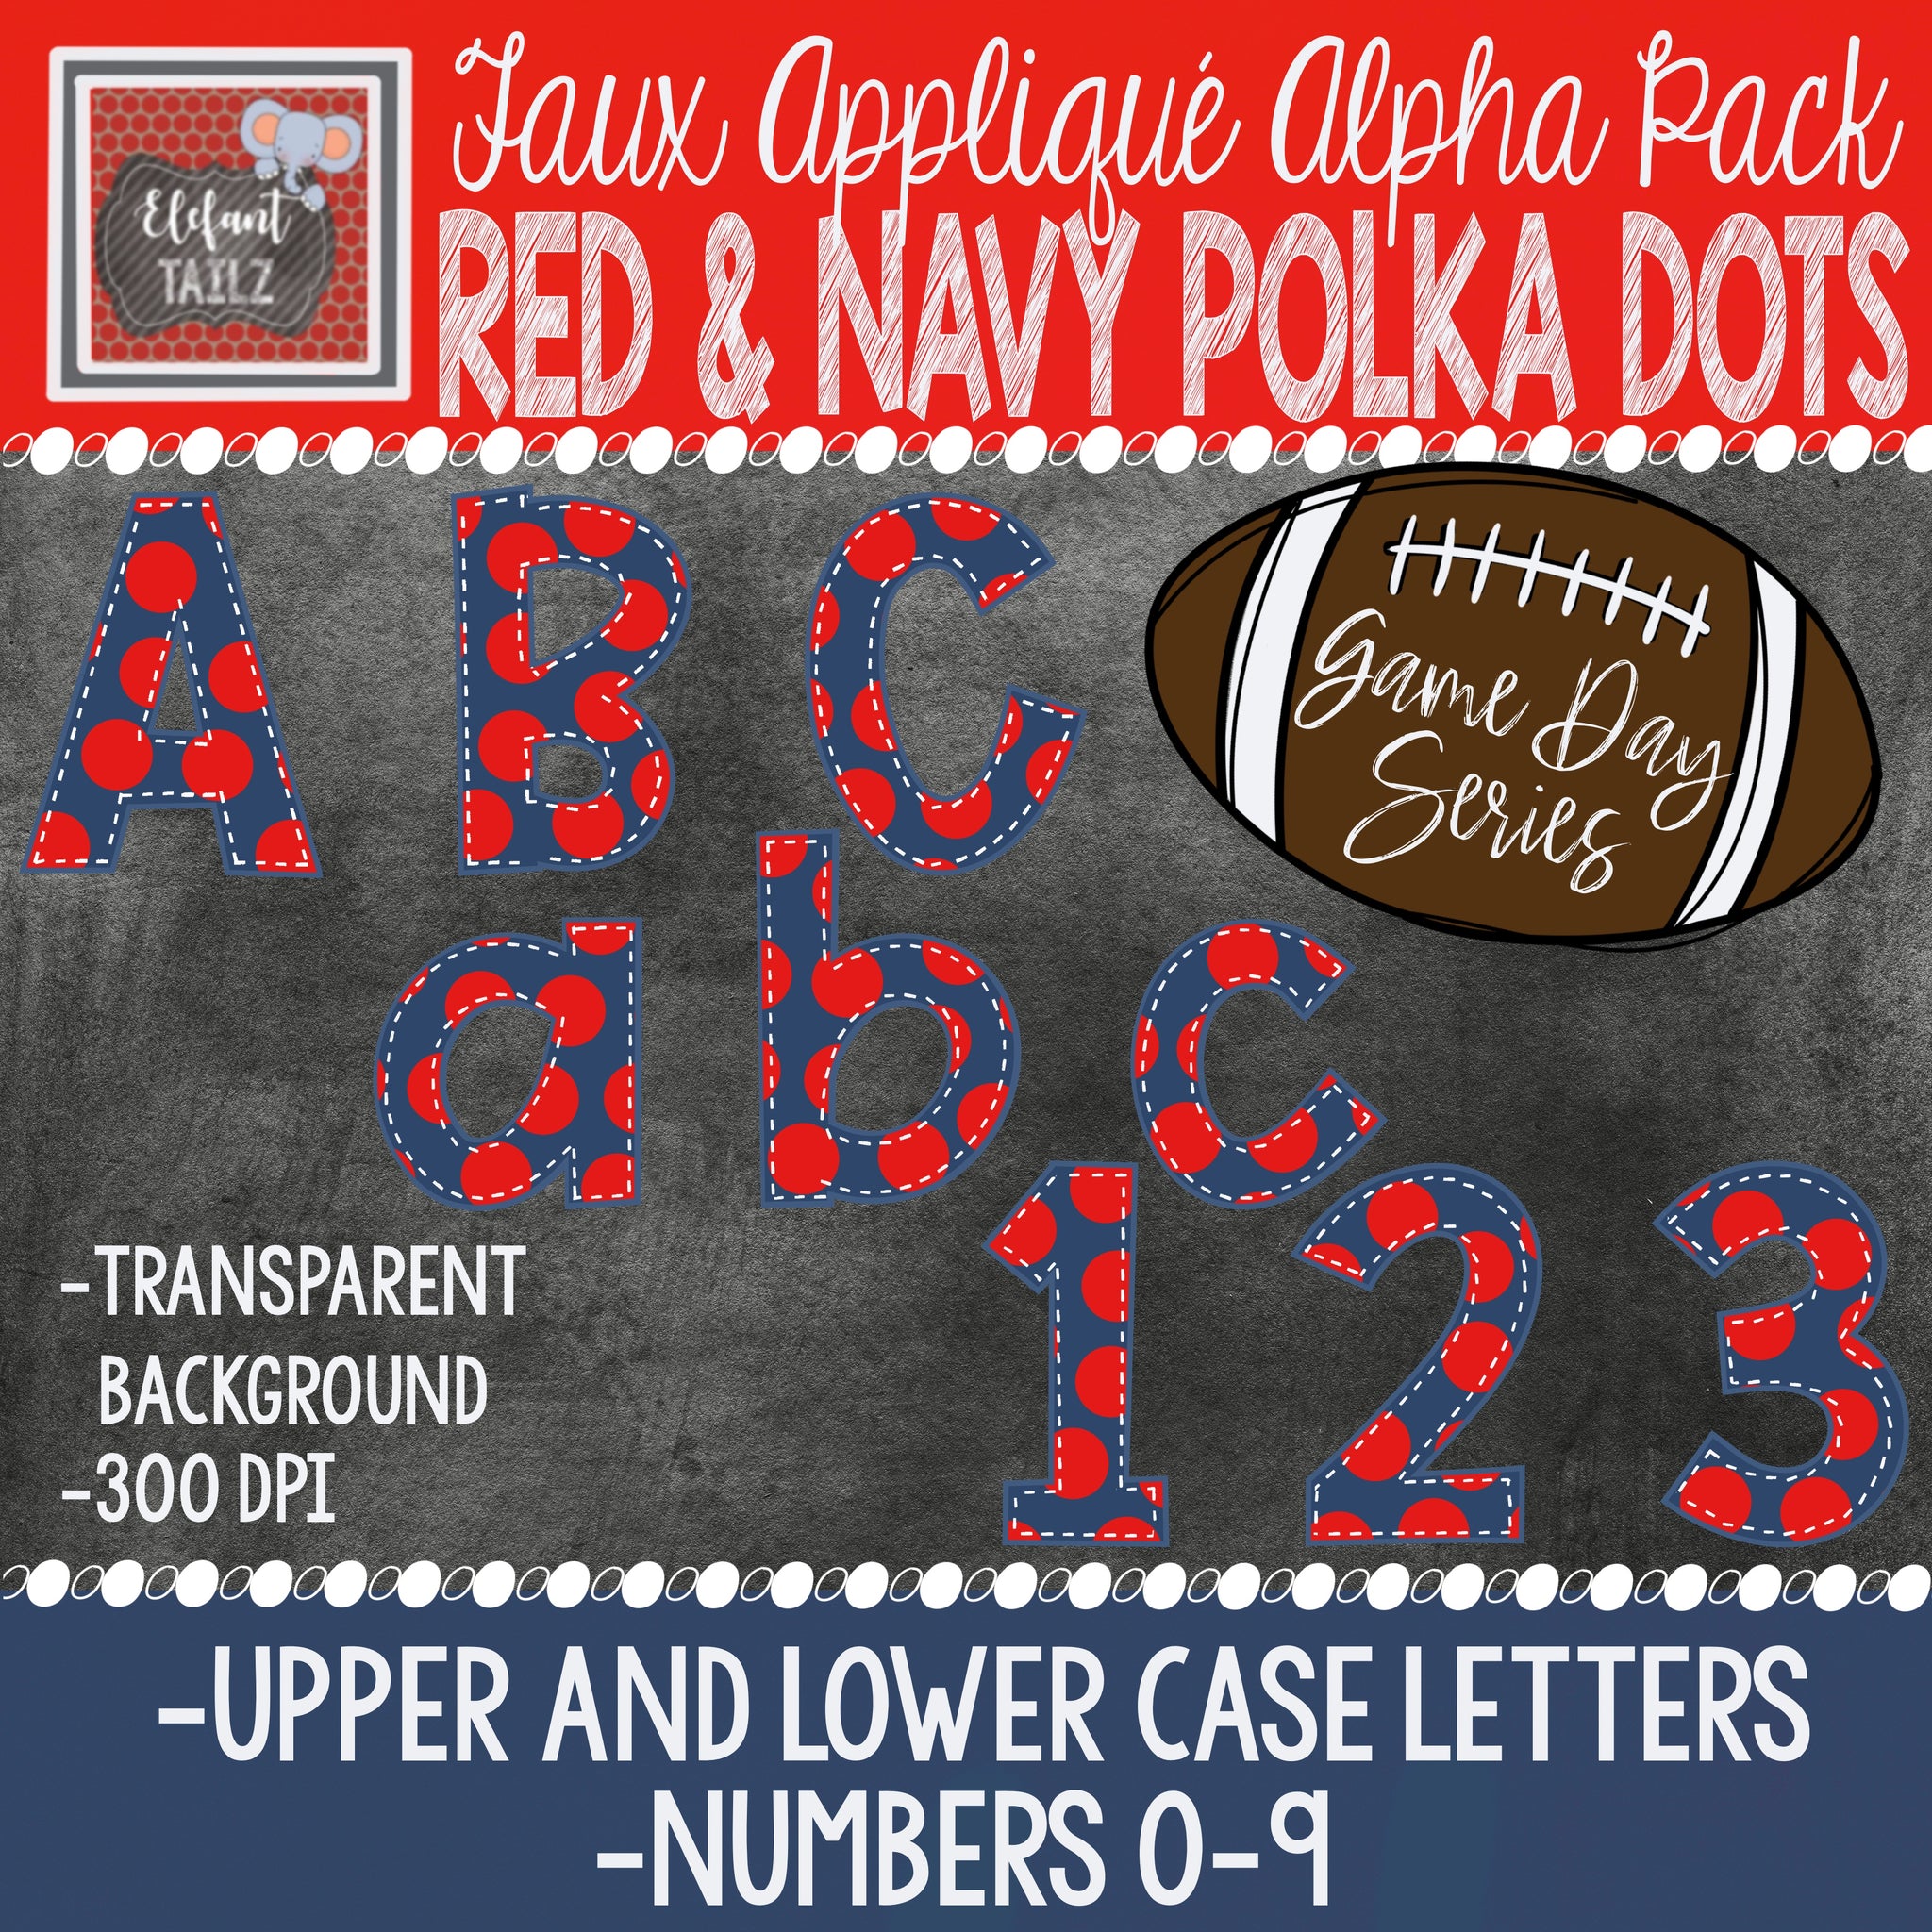 Game Day Series Alpha & Number Pack - Red & Navy Polka Dots